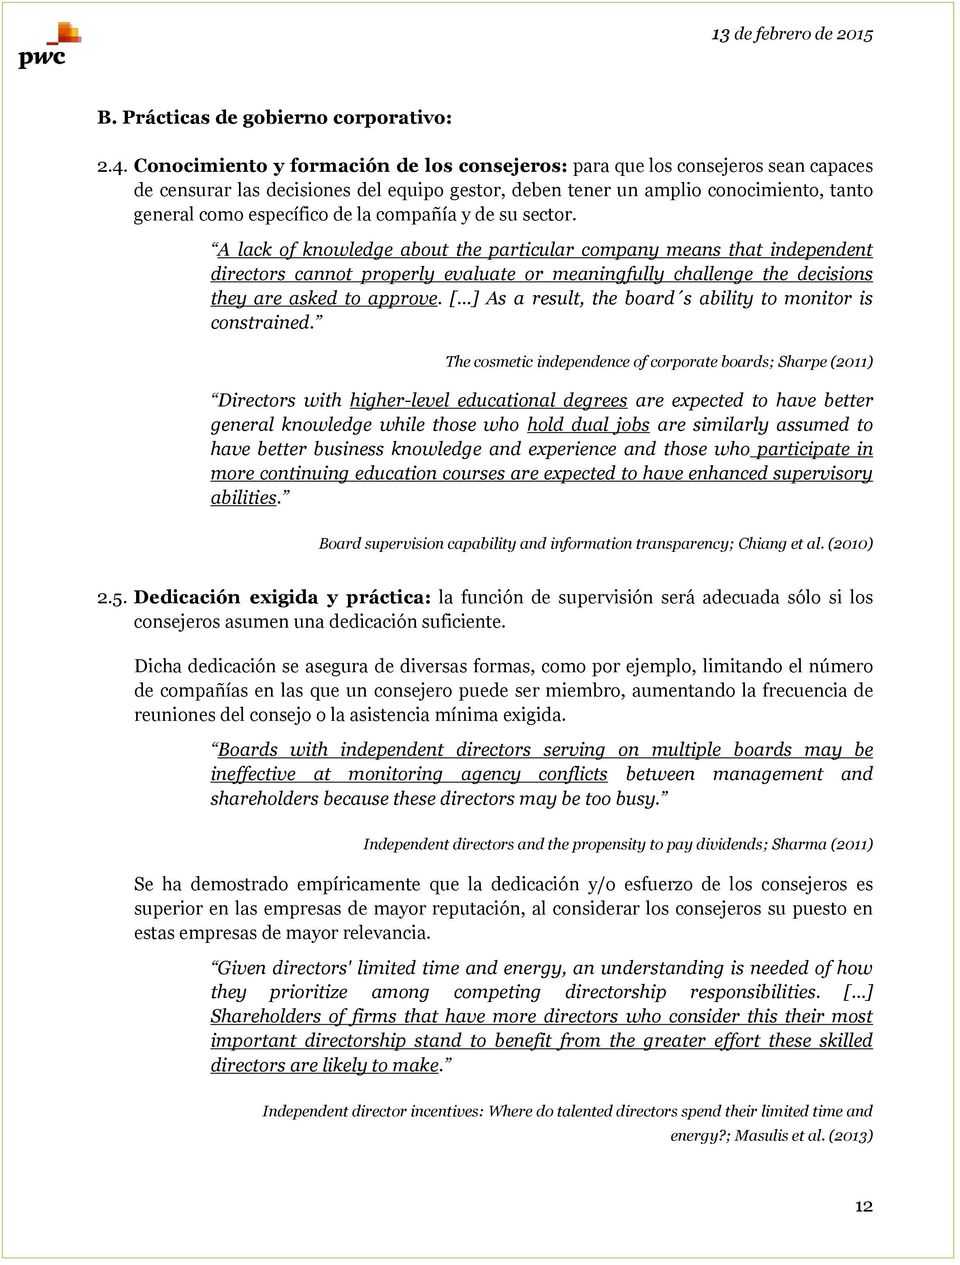 compañía y de su sector. A lack of knowledge about the particular company means that independent directors cannot properly evaluate or meaningfully challenge the decisions they are asked to approve.